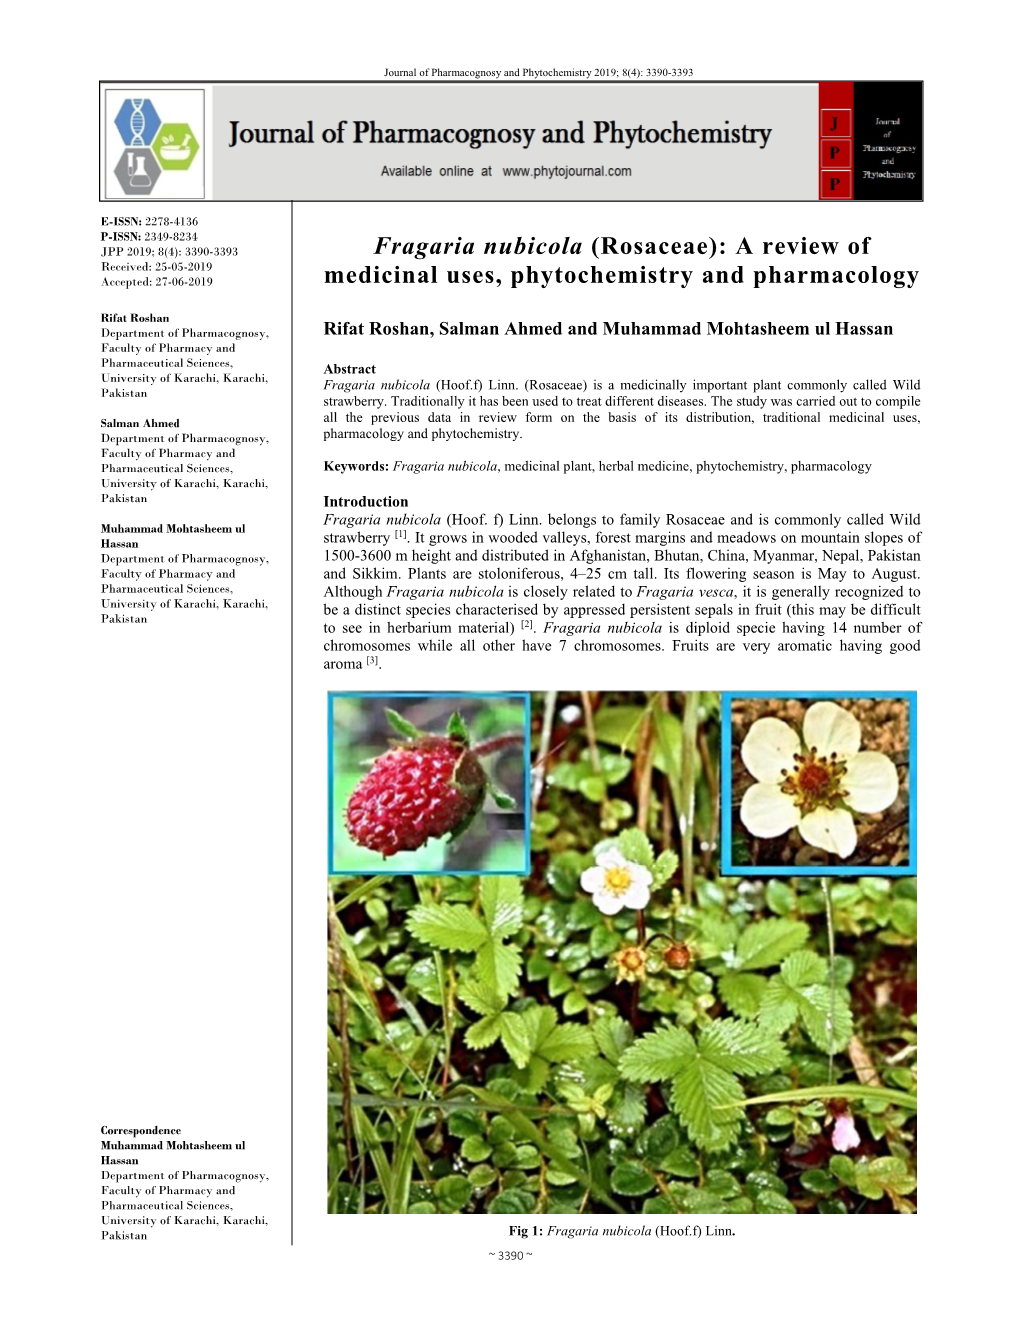 Fragaria Nubicola (Rosaceae): a Review of Received: 25-05-2019 Accepted: 27-06-2019 Medicinal Uses, Phytochemistry and Pharmacology